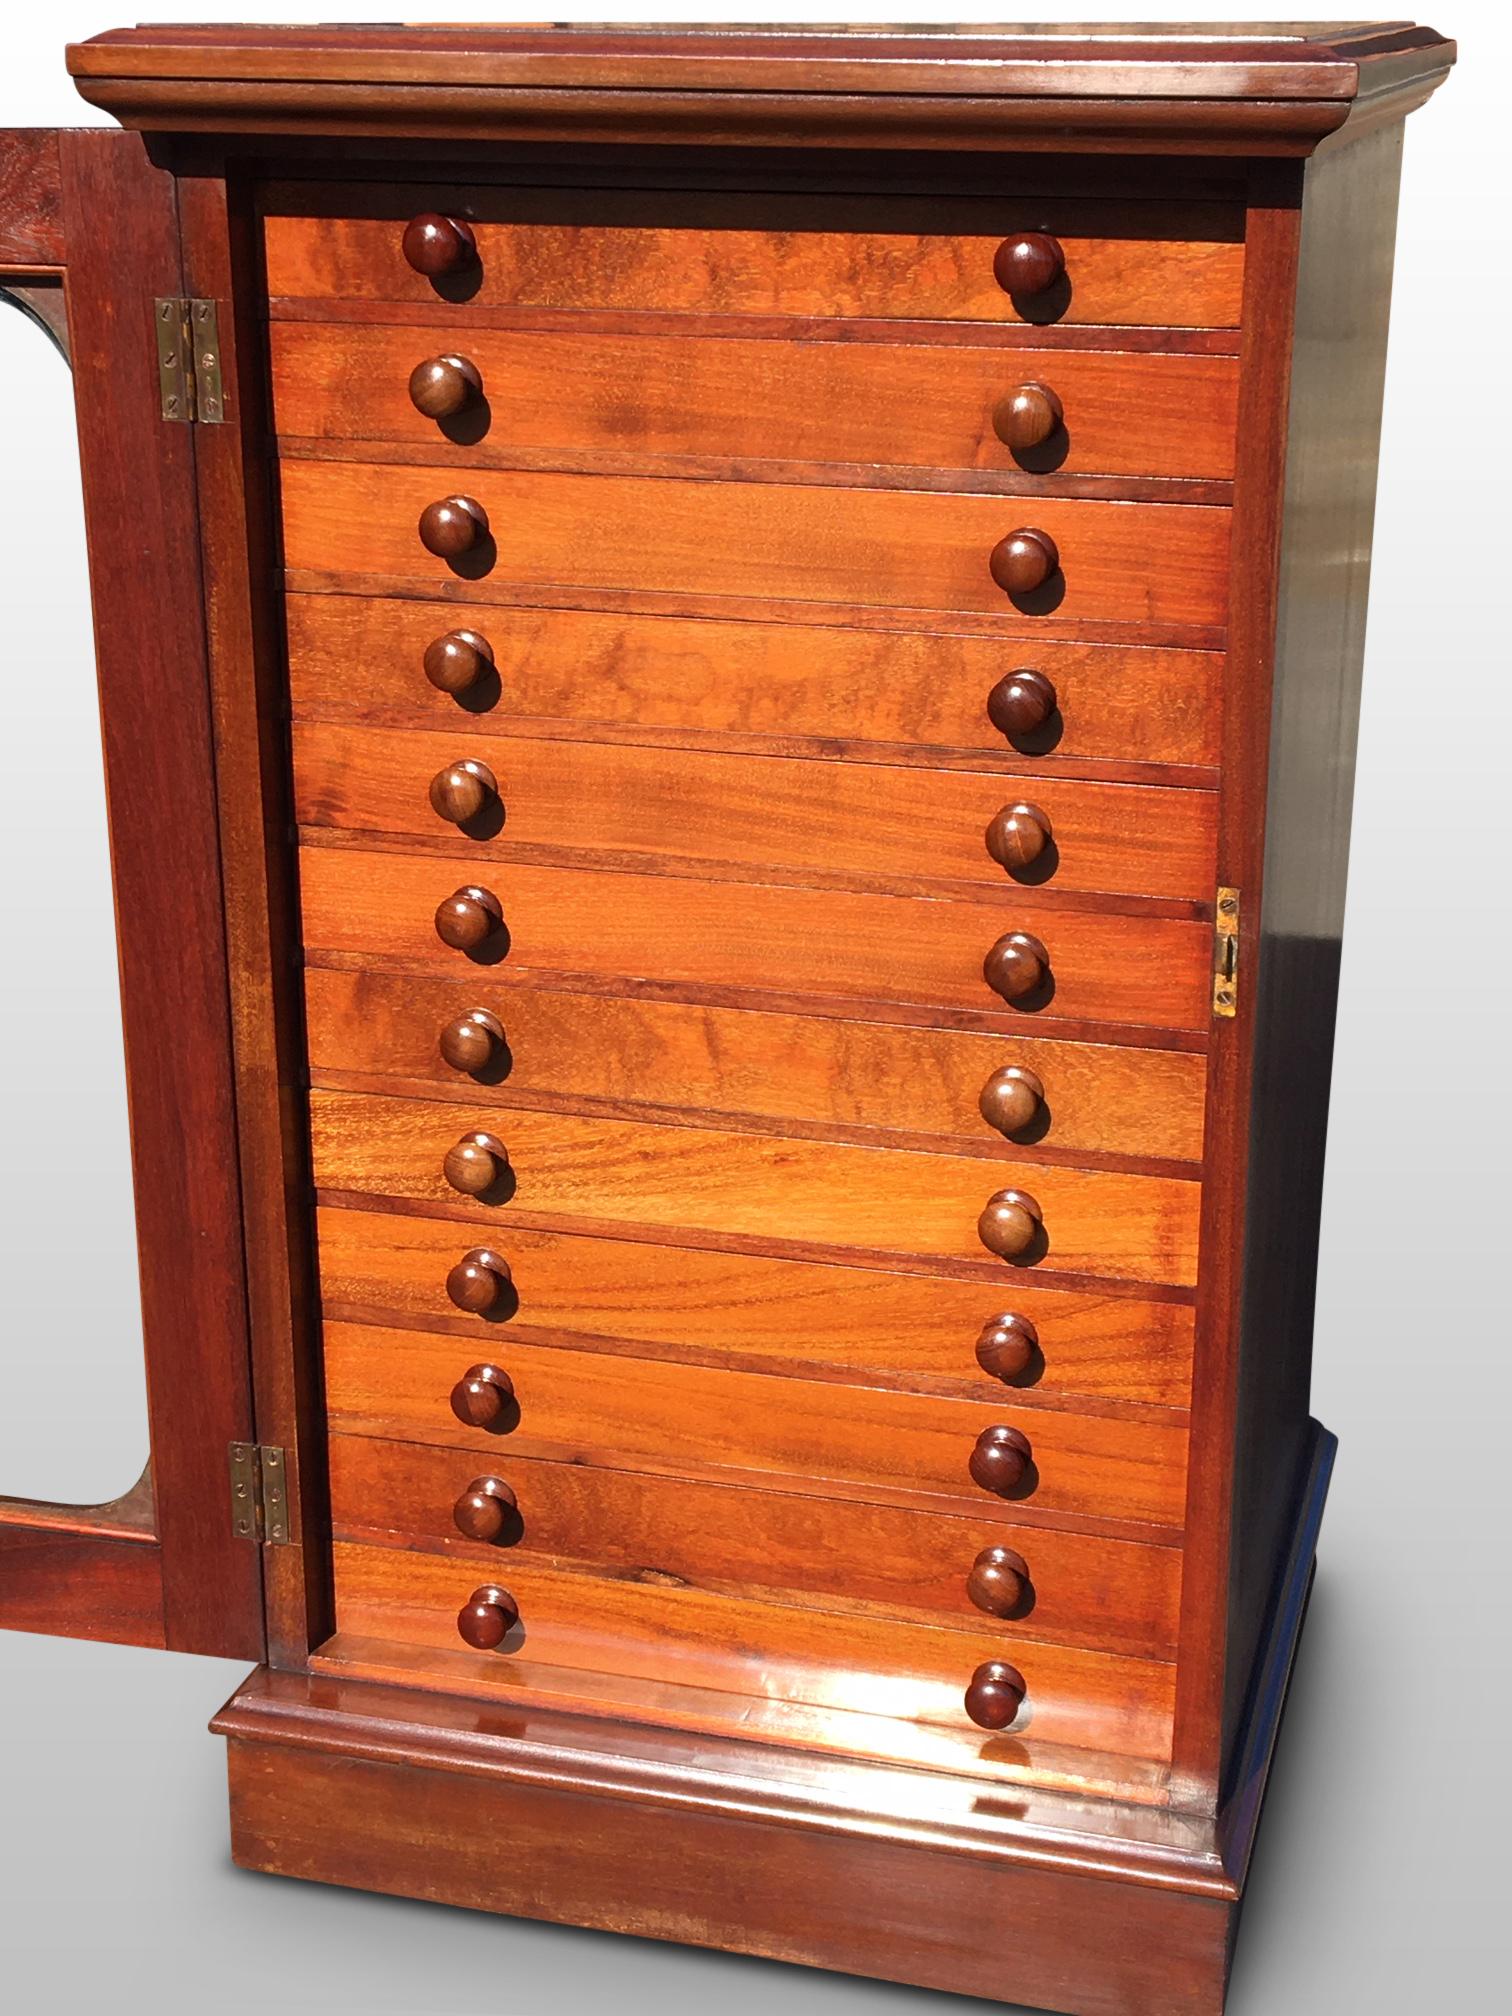 Fine quality English mahogany collectors cabinet, circa 1880
This delightful cabinet has an arrangement of 12 drawers with original glass covers and
small mahogany button handles. The drawers are exceptional quality and run smoothly.
The entire